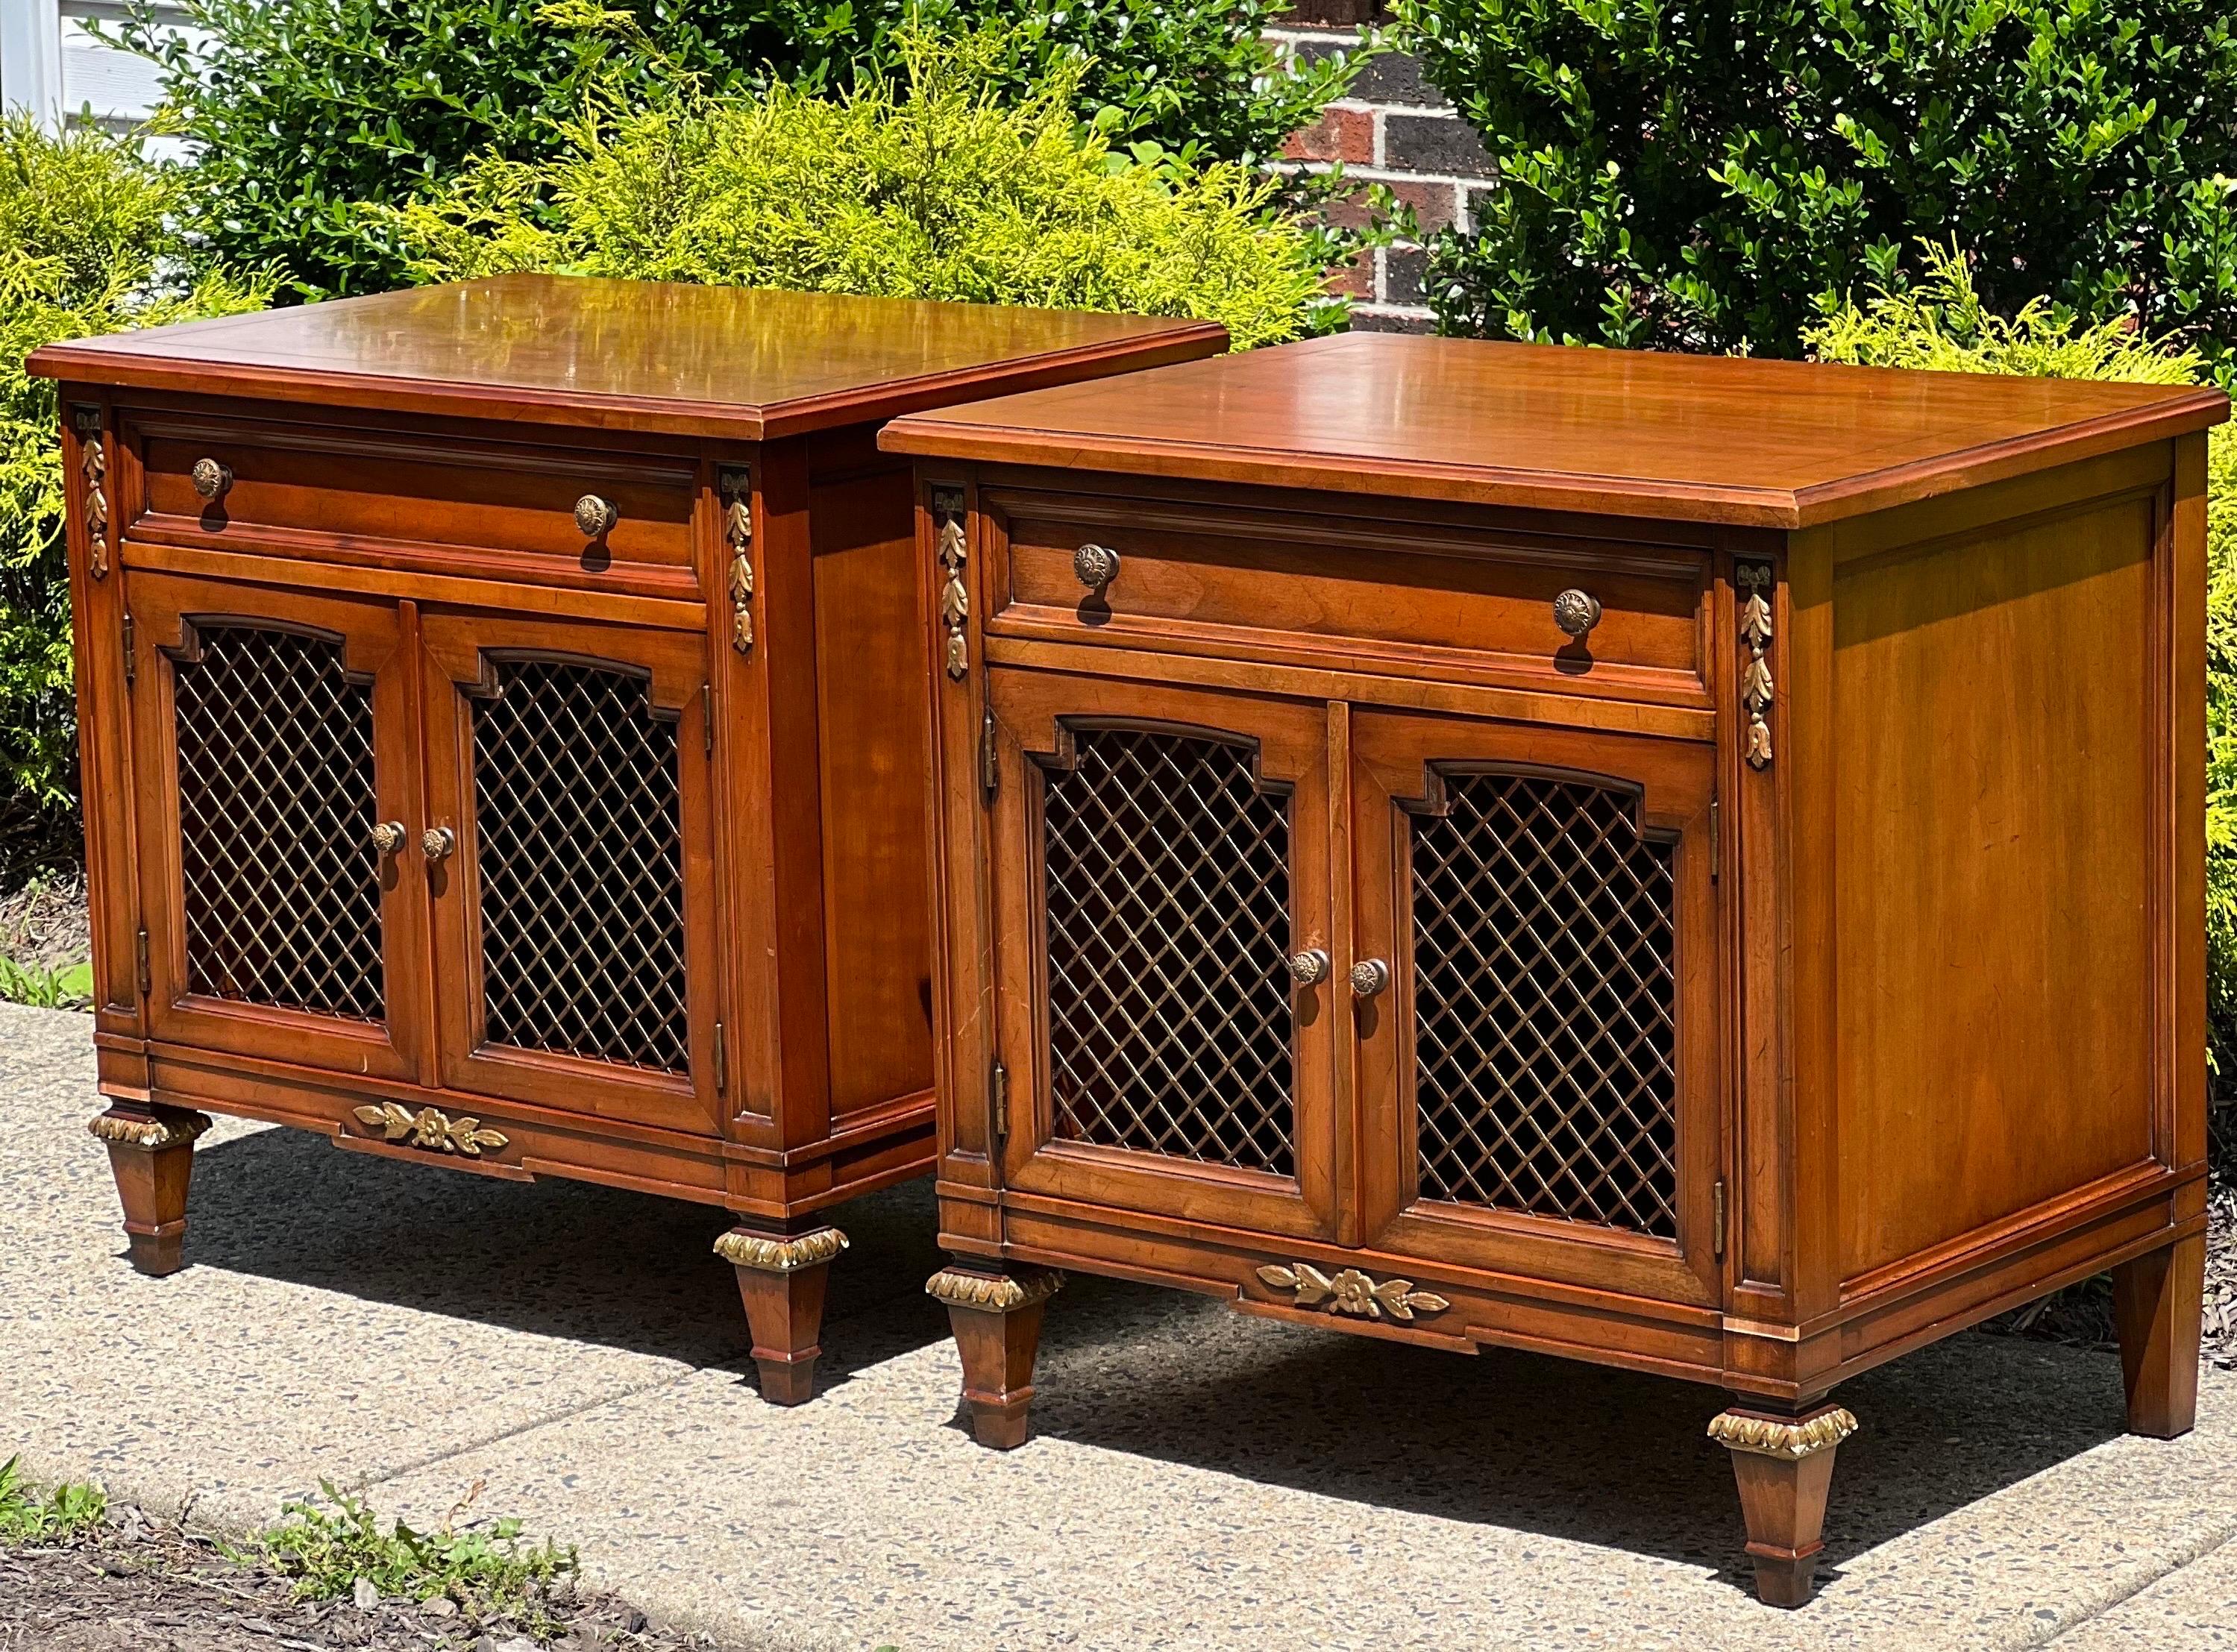 Stately French Regency style nightstands American crafted by Kindel Furniture of Grand Rapids, Michigan, 1980's.

Part of the Belvedere Collection, these nightstands are made from rich cherry wood and feature original brass hardware and ormolu.